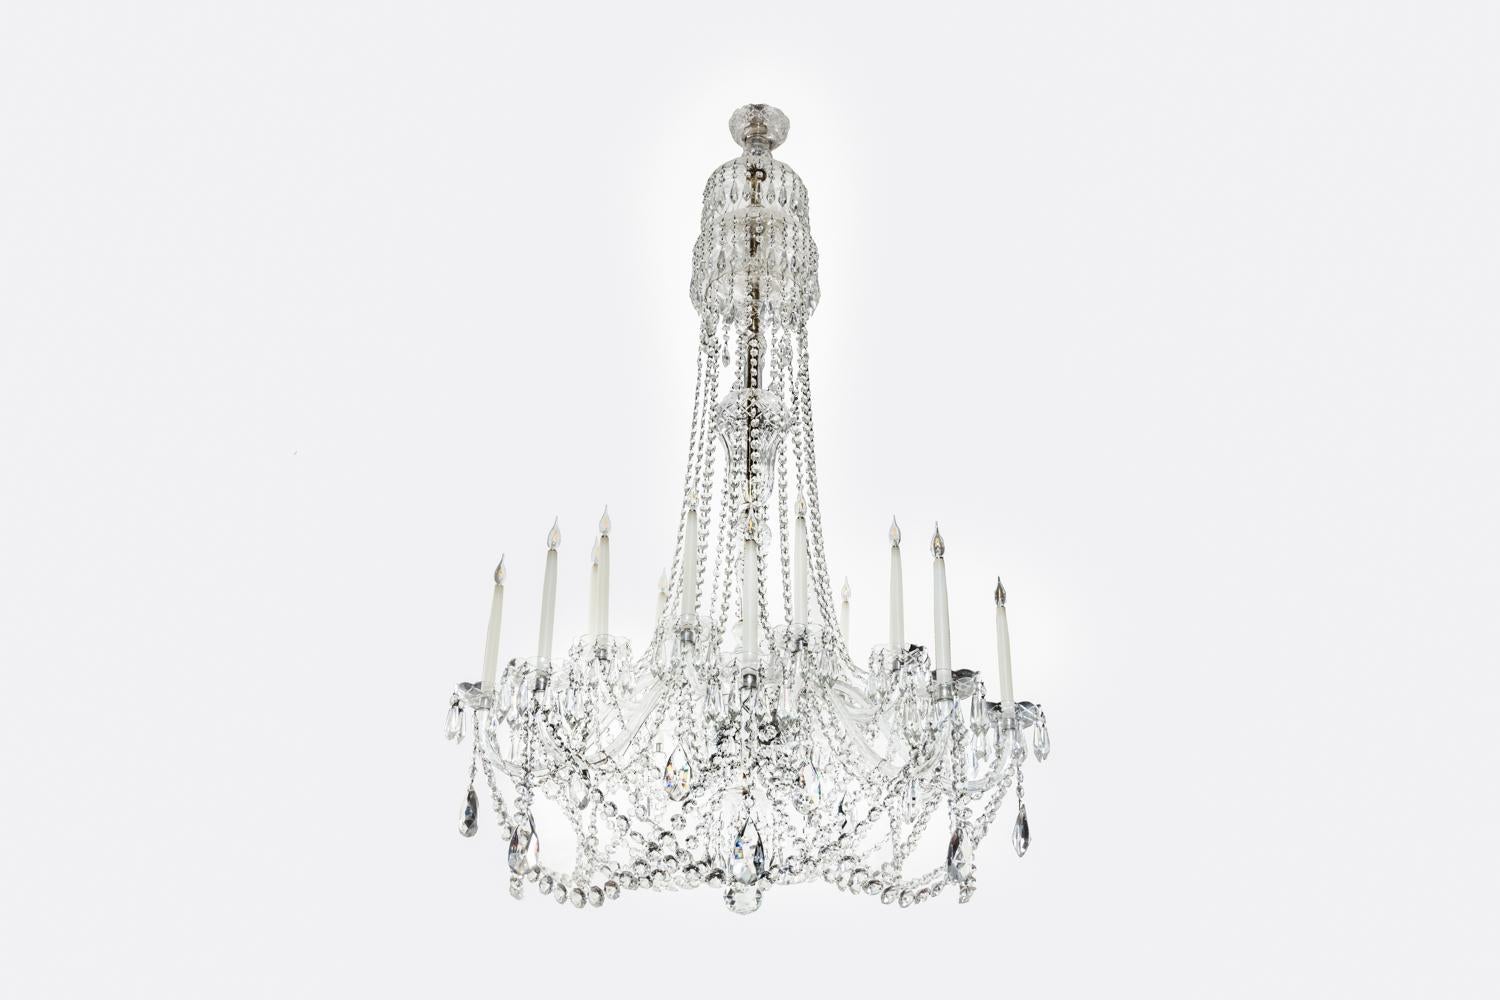 Exceptionally large, early 20th century English crystal chandelier. The central baluster stem having bowl hung with long swags of faceted drops to catch the light. The middle cut glass bowl has eighteen curved candle arms with large glass drops,